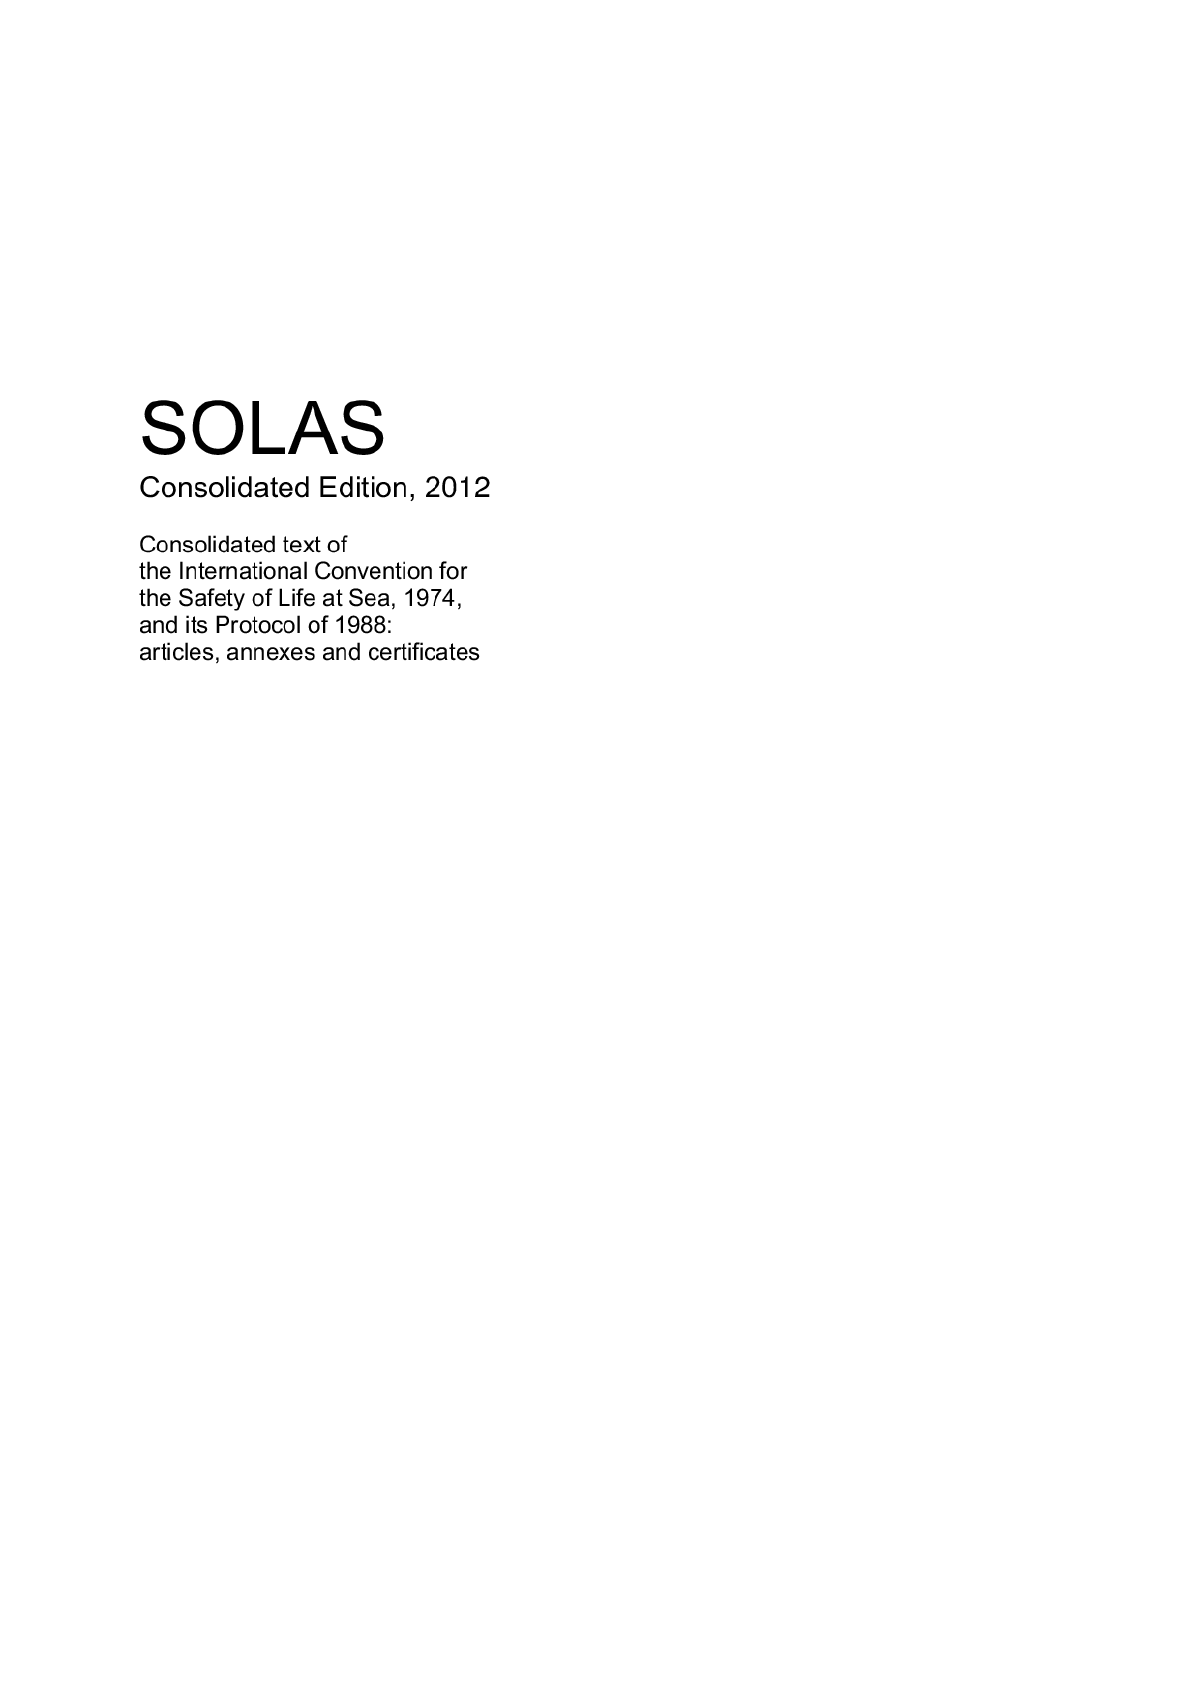 SOLAS Consolidated Edition 2012-图一